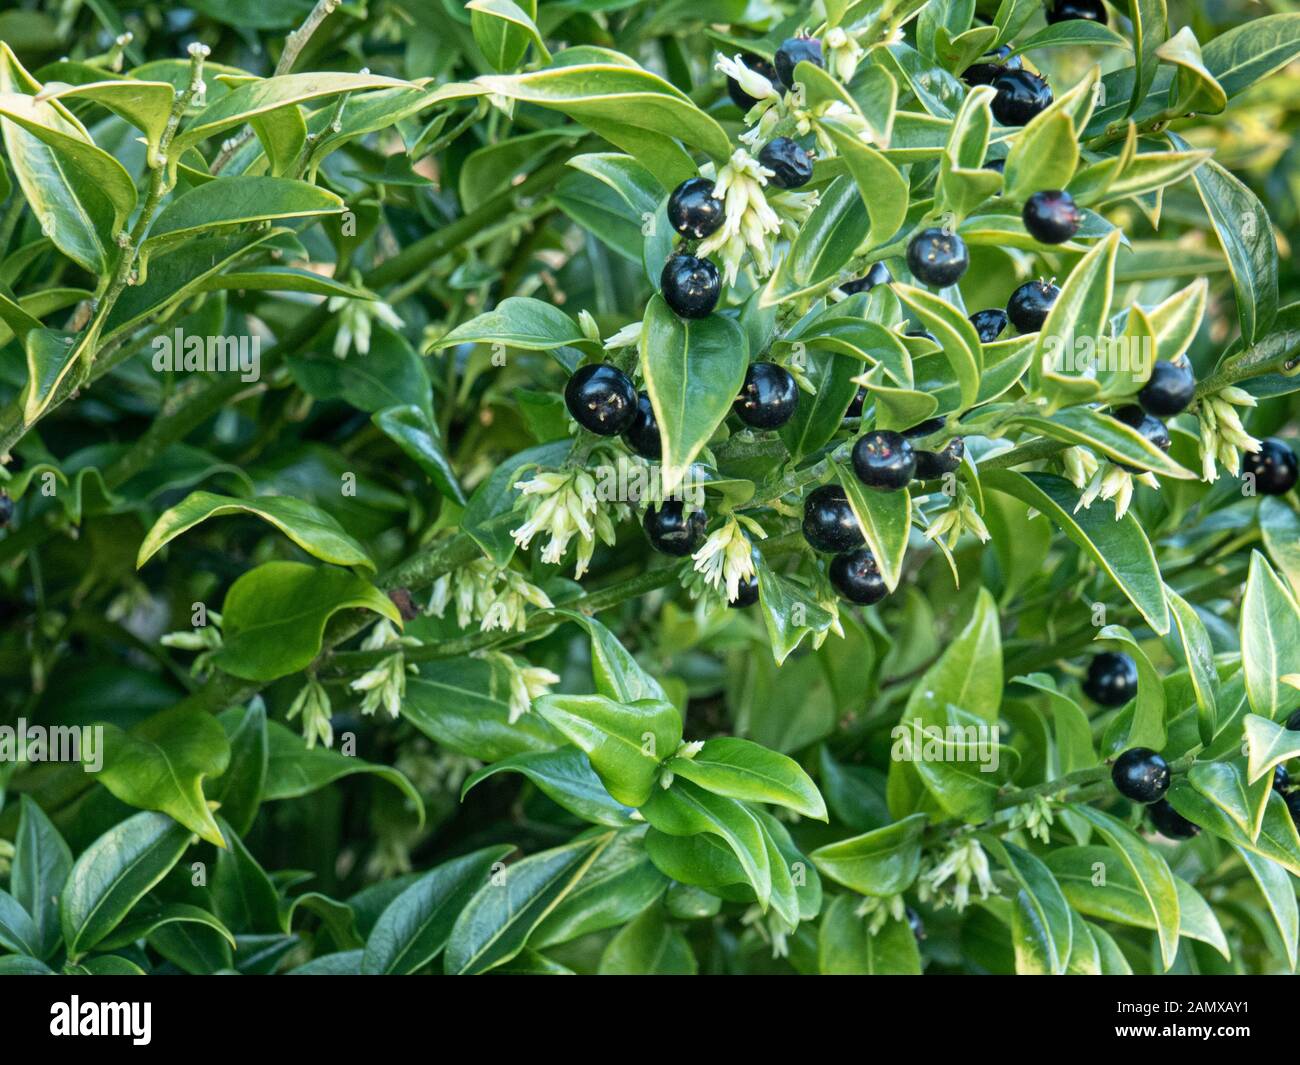 A plant of  dwarf sweet box - Sarcocca humilis showing the cream flowers and shiny black fruits Stock Photo